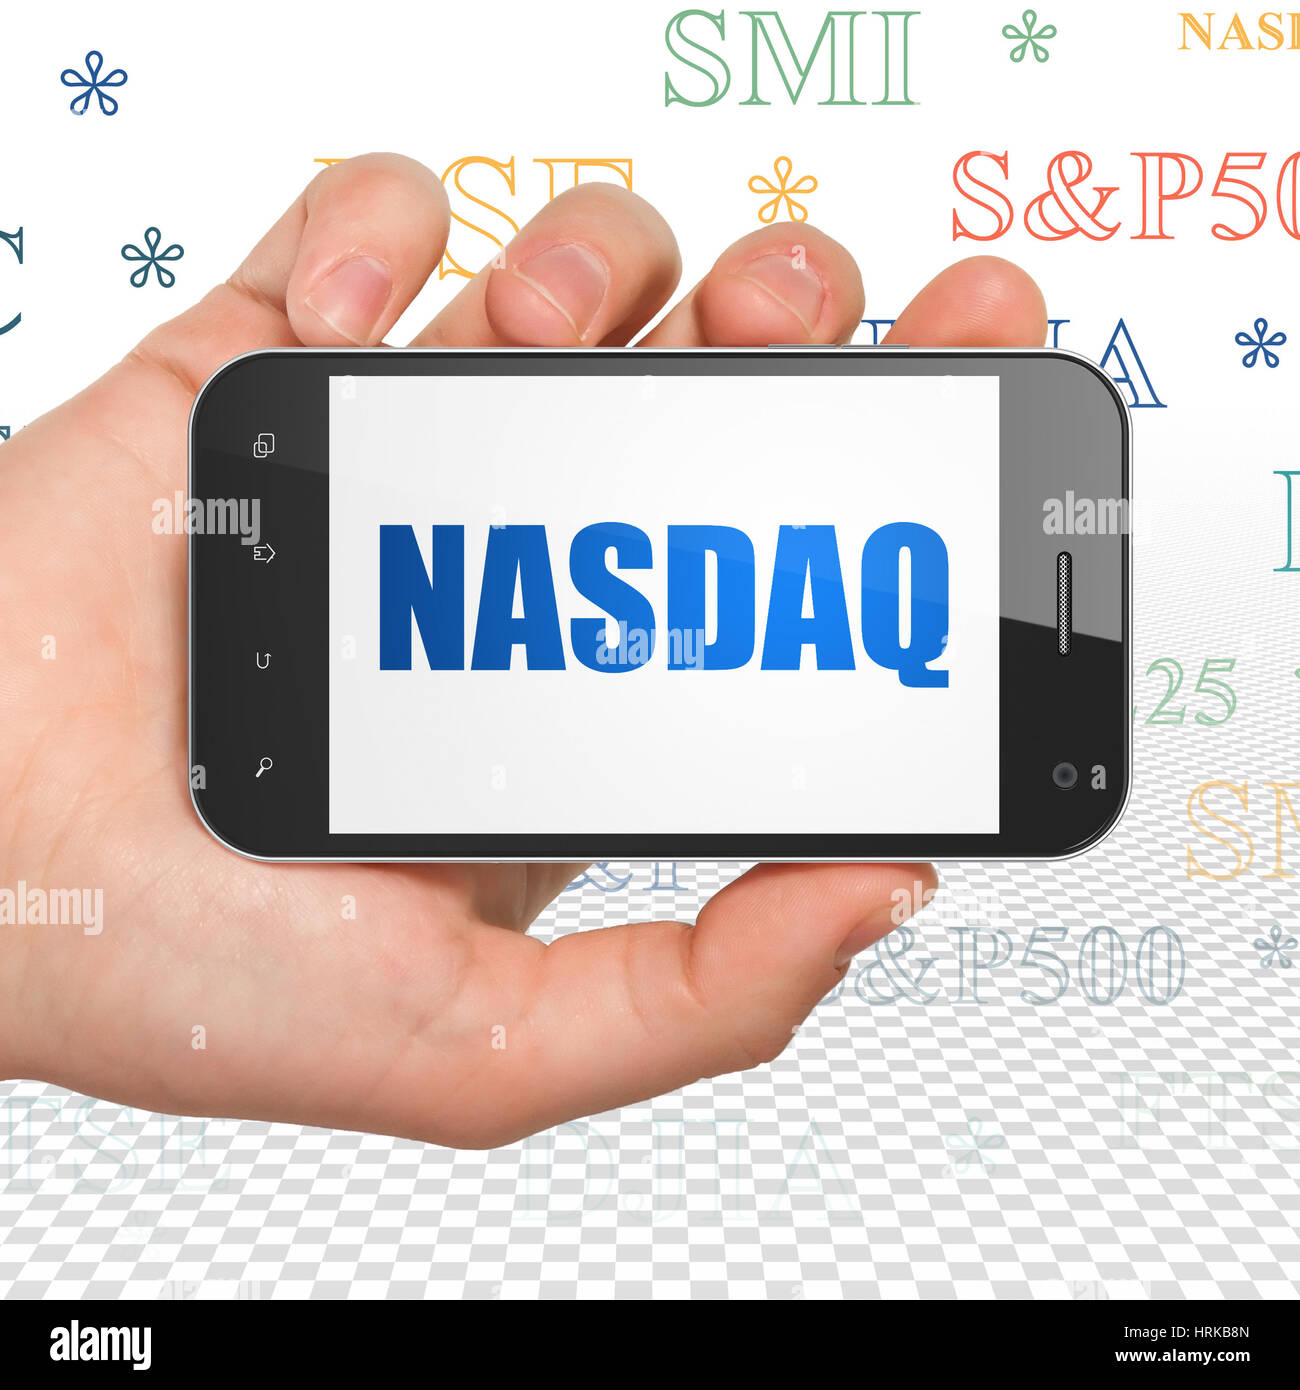 Hands Holding Smartphone Displaying Logo of Vanity Fair Editorial Stock  Photo - Image of application, hands: 186518438